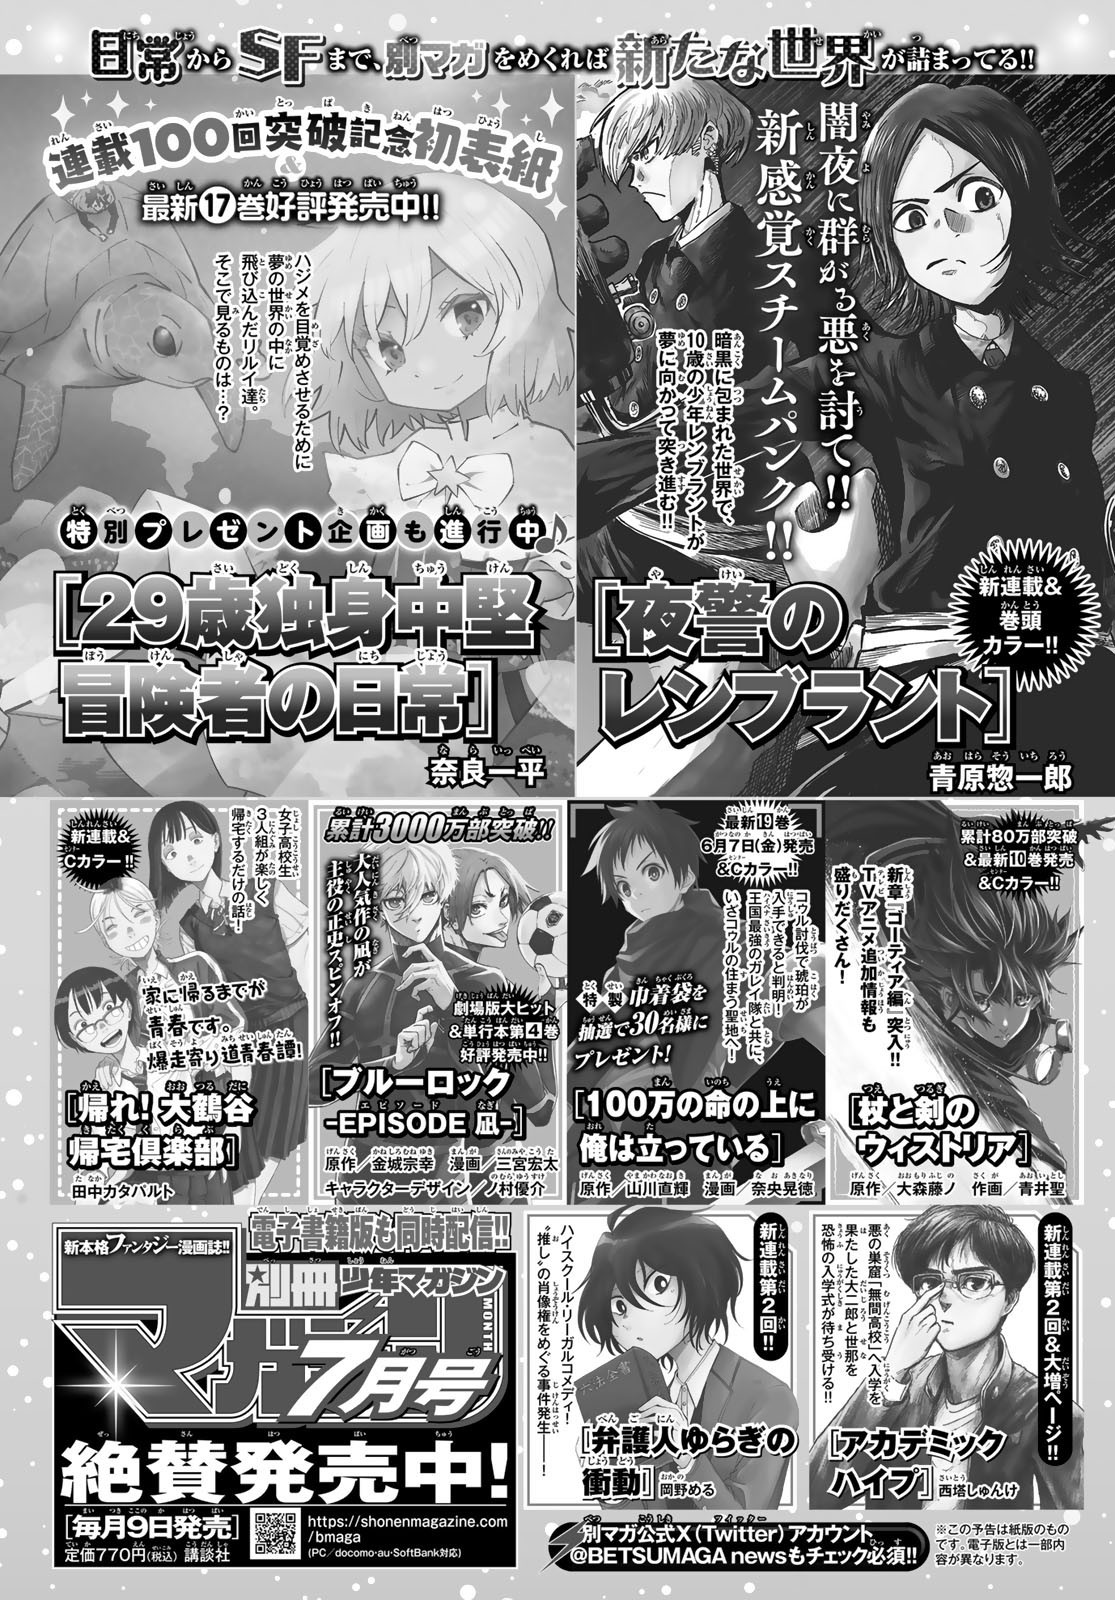 Weekly Shōnen Magazine - 週刊少年マガジン - Chapter 2024-28 - Page 425